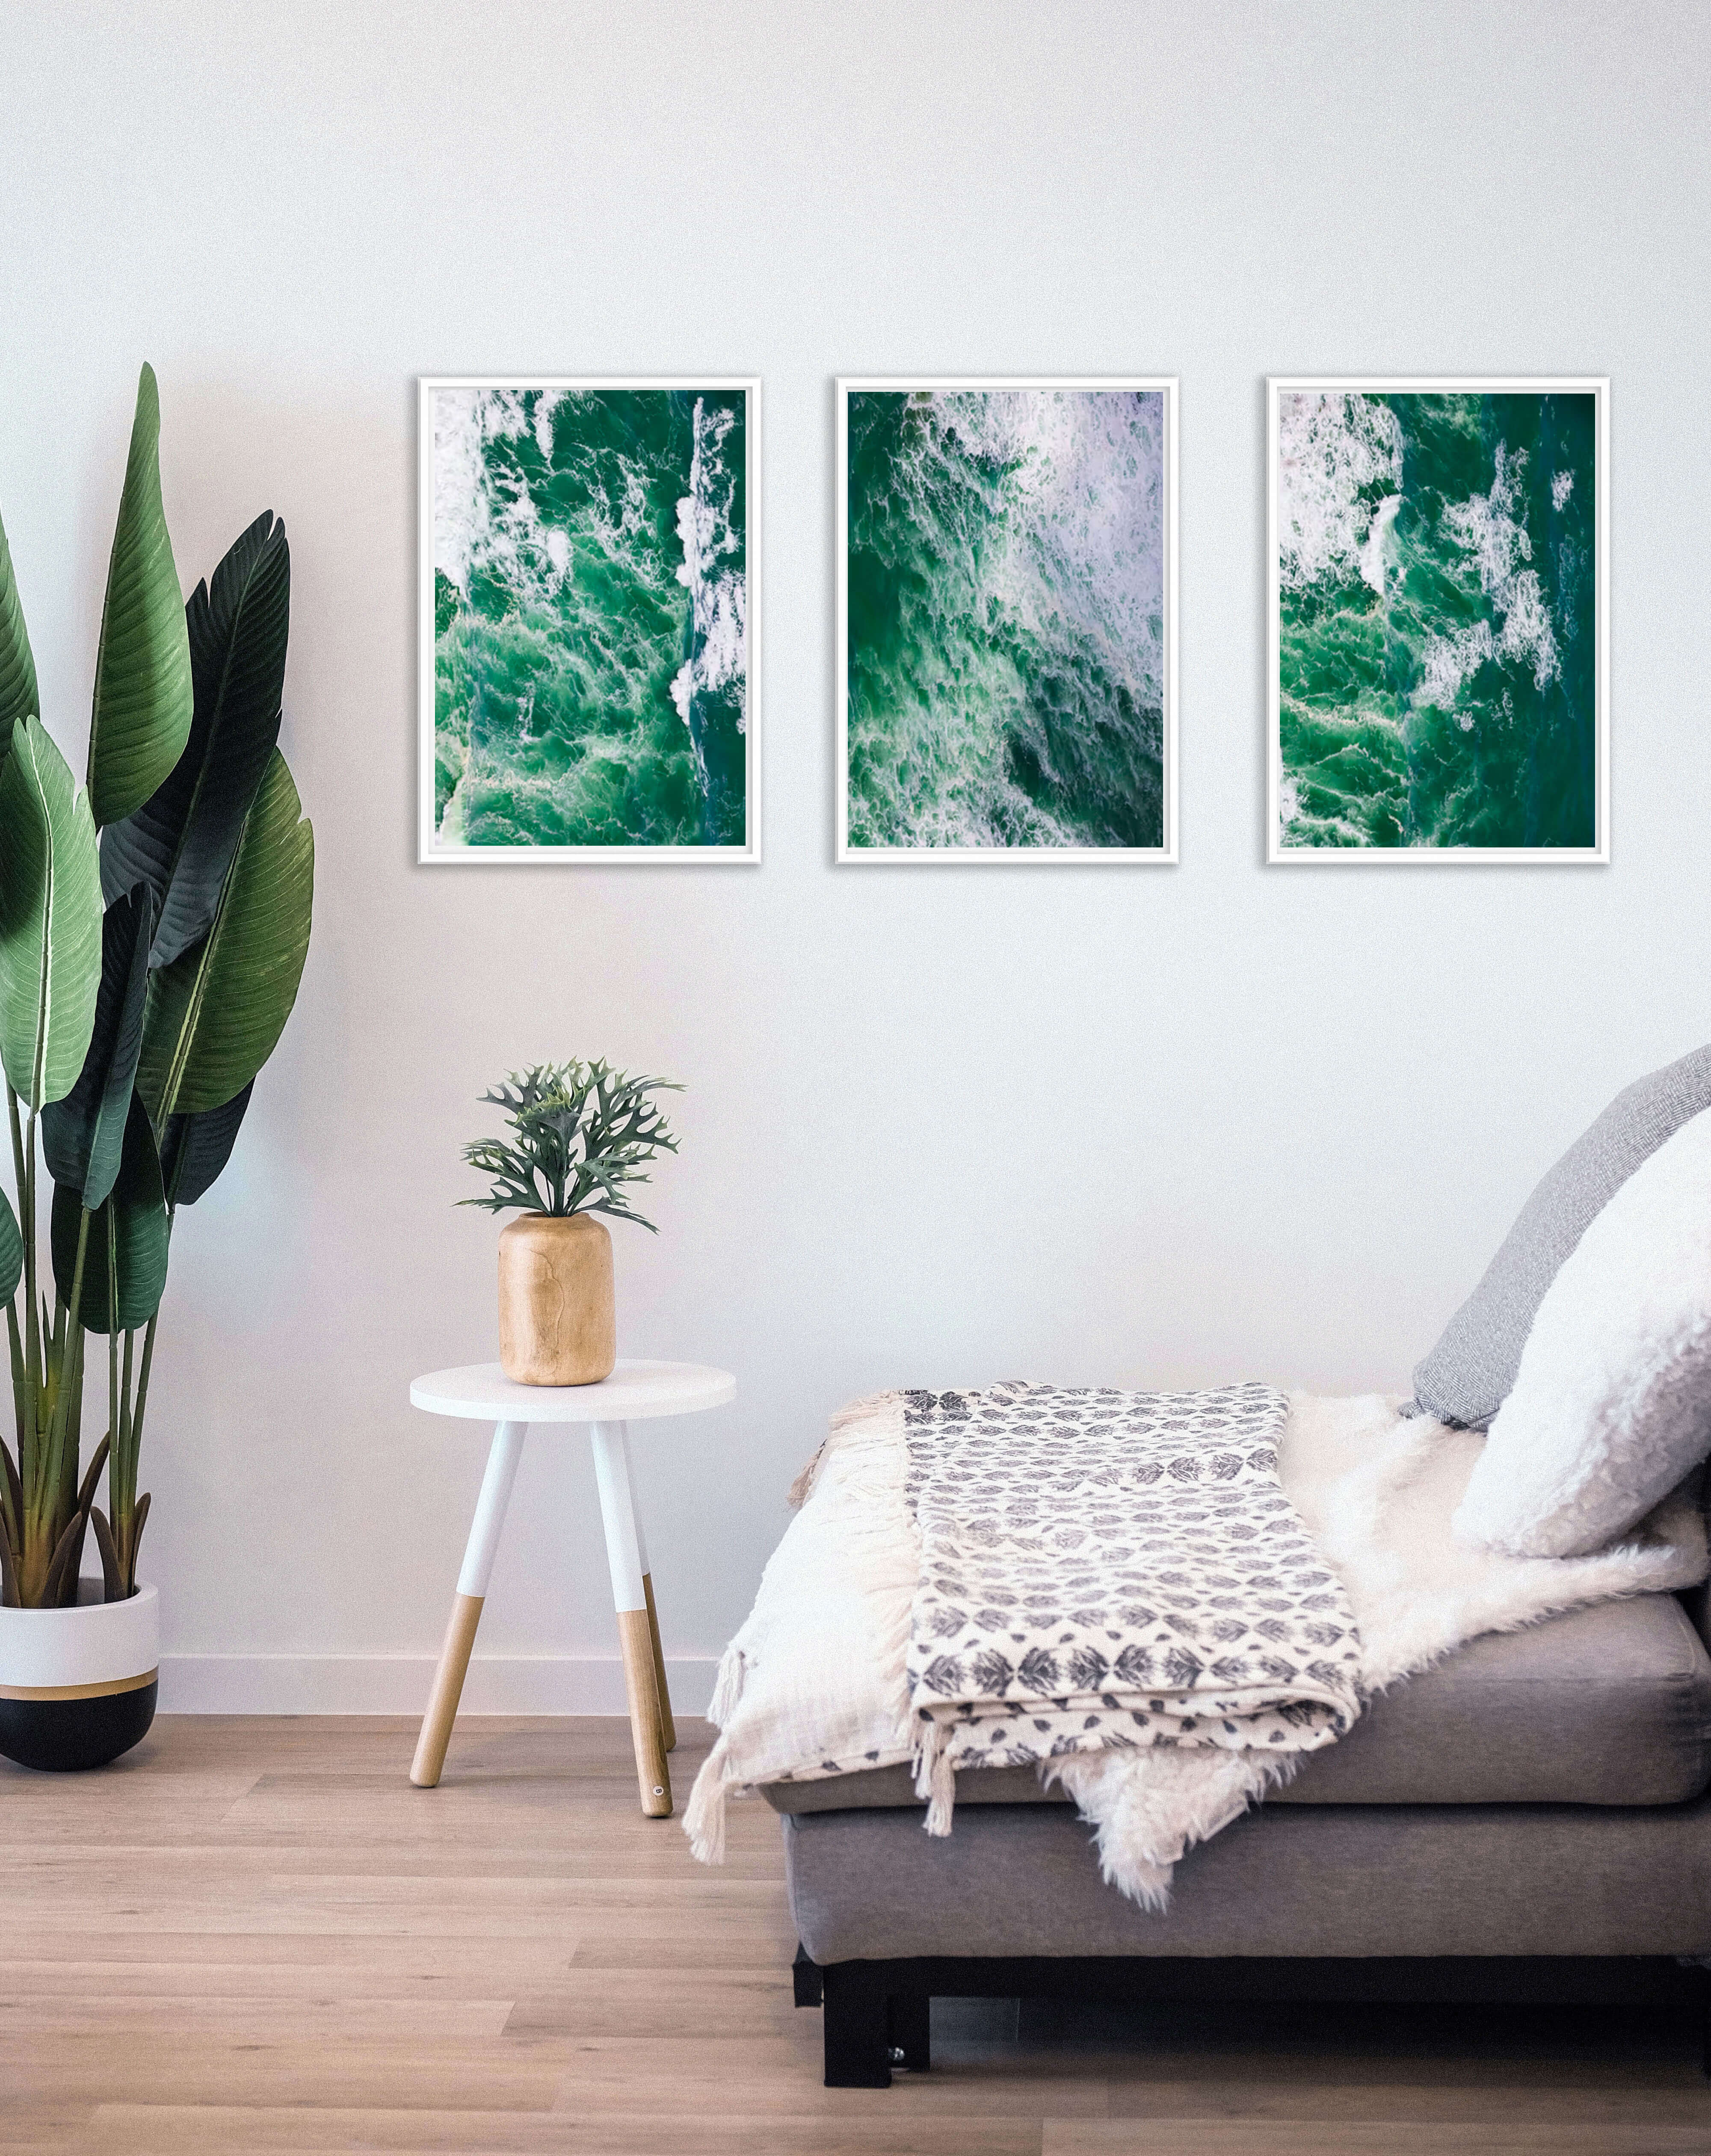 13 Unique Wall Art Ideas to Liven Up Your Home